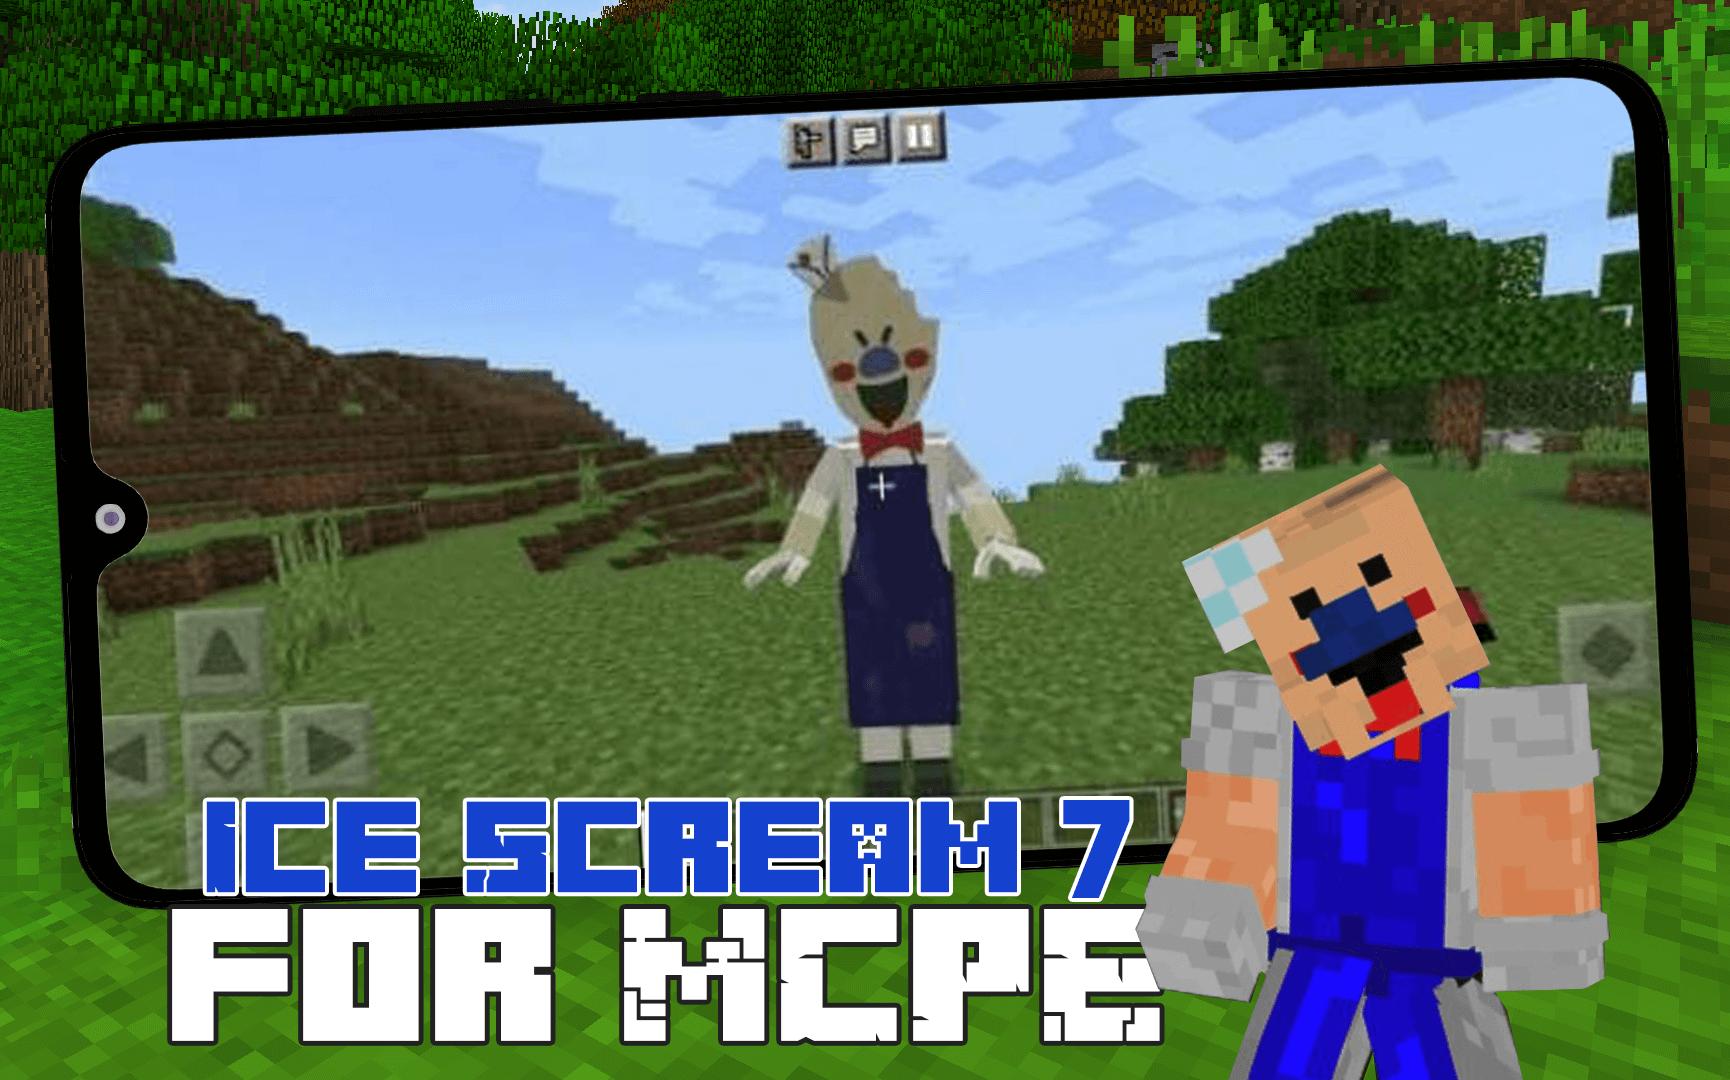 Download Ice Scream 7 Mod Minecraft android on PC